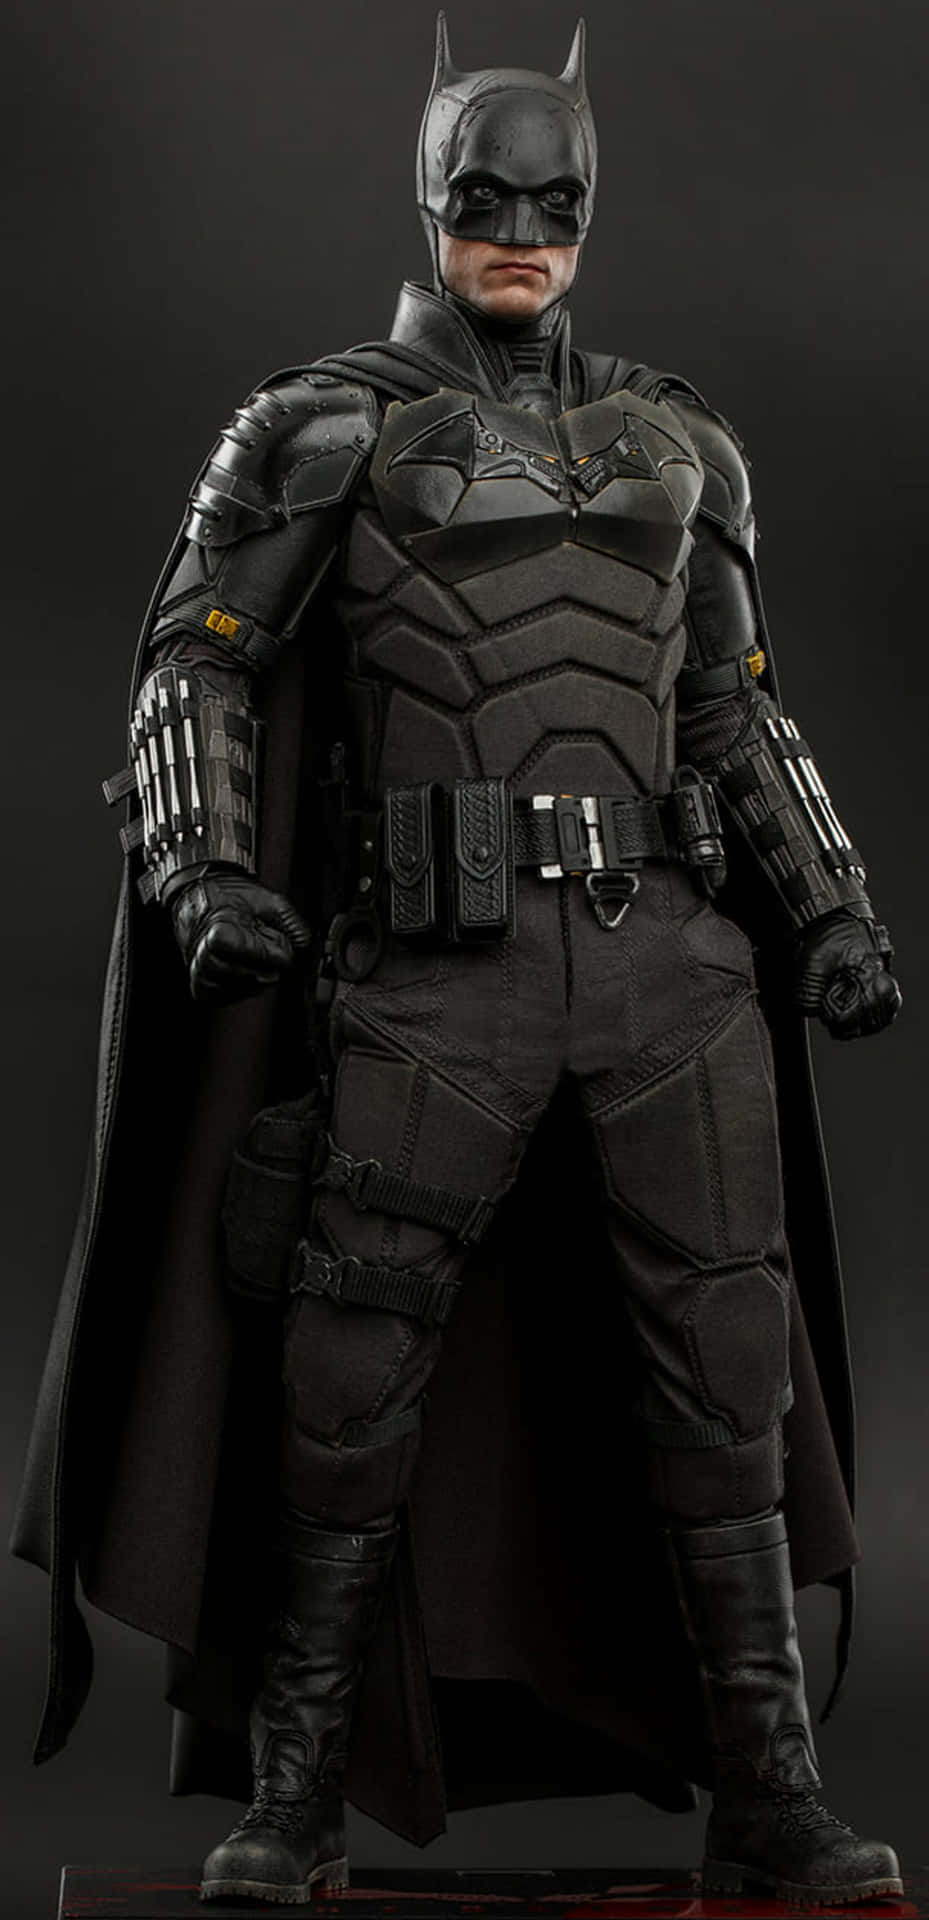 Caption: The Dark Knight and his Armored Bat-suit Wallpaper